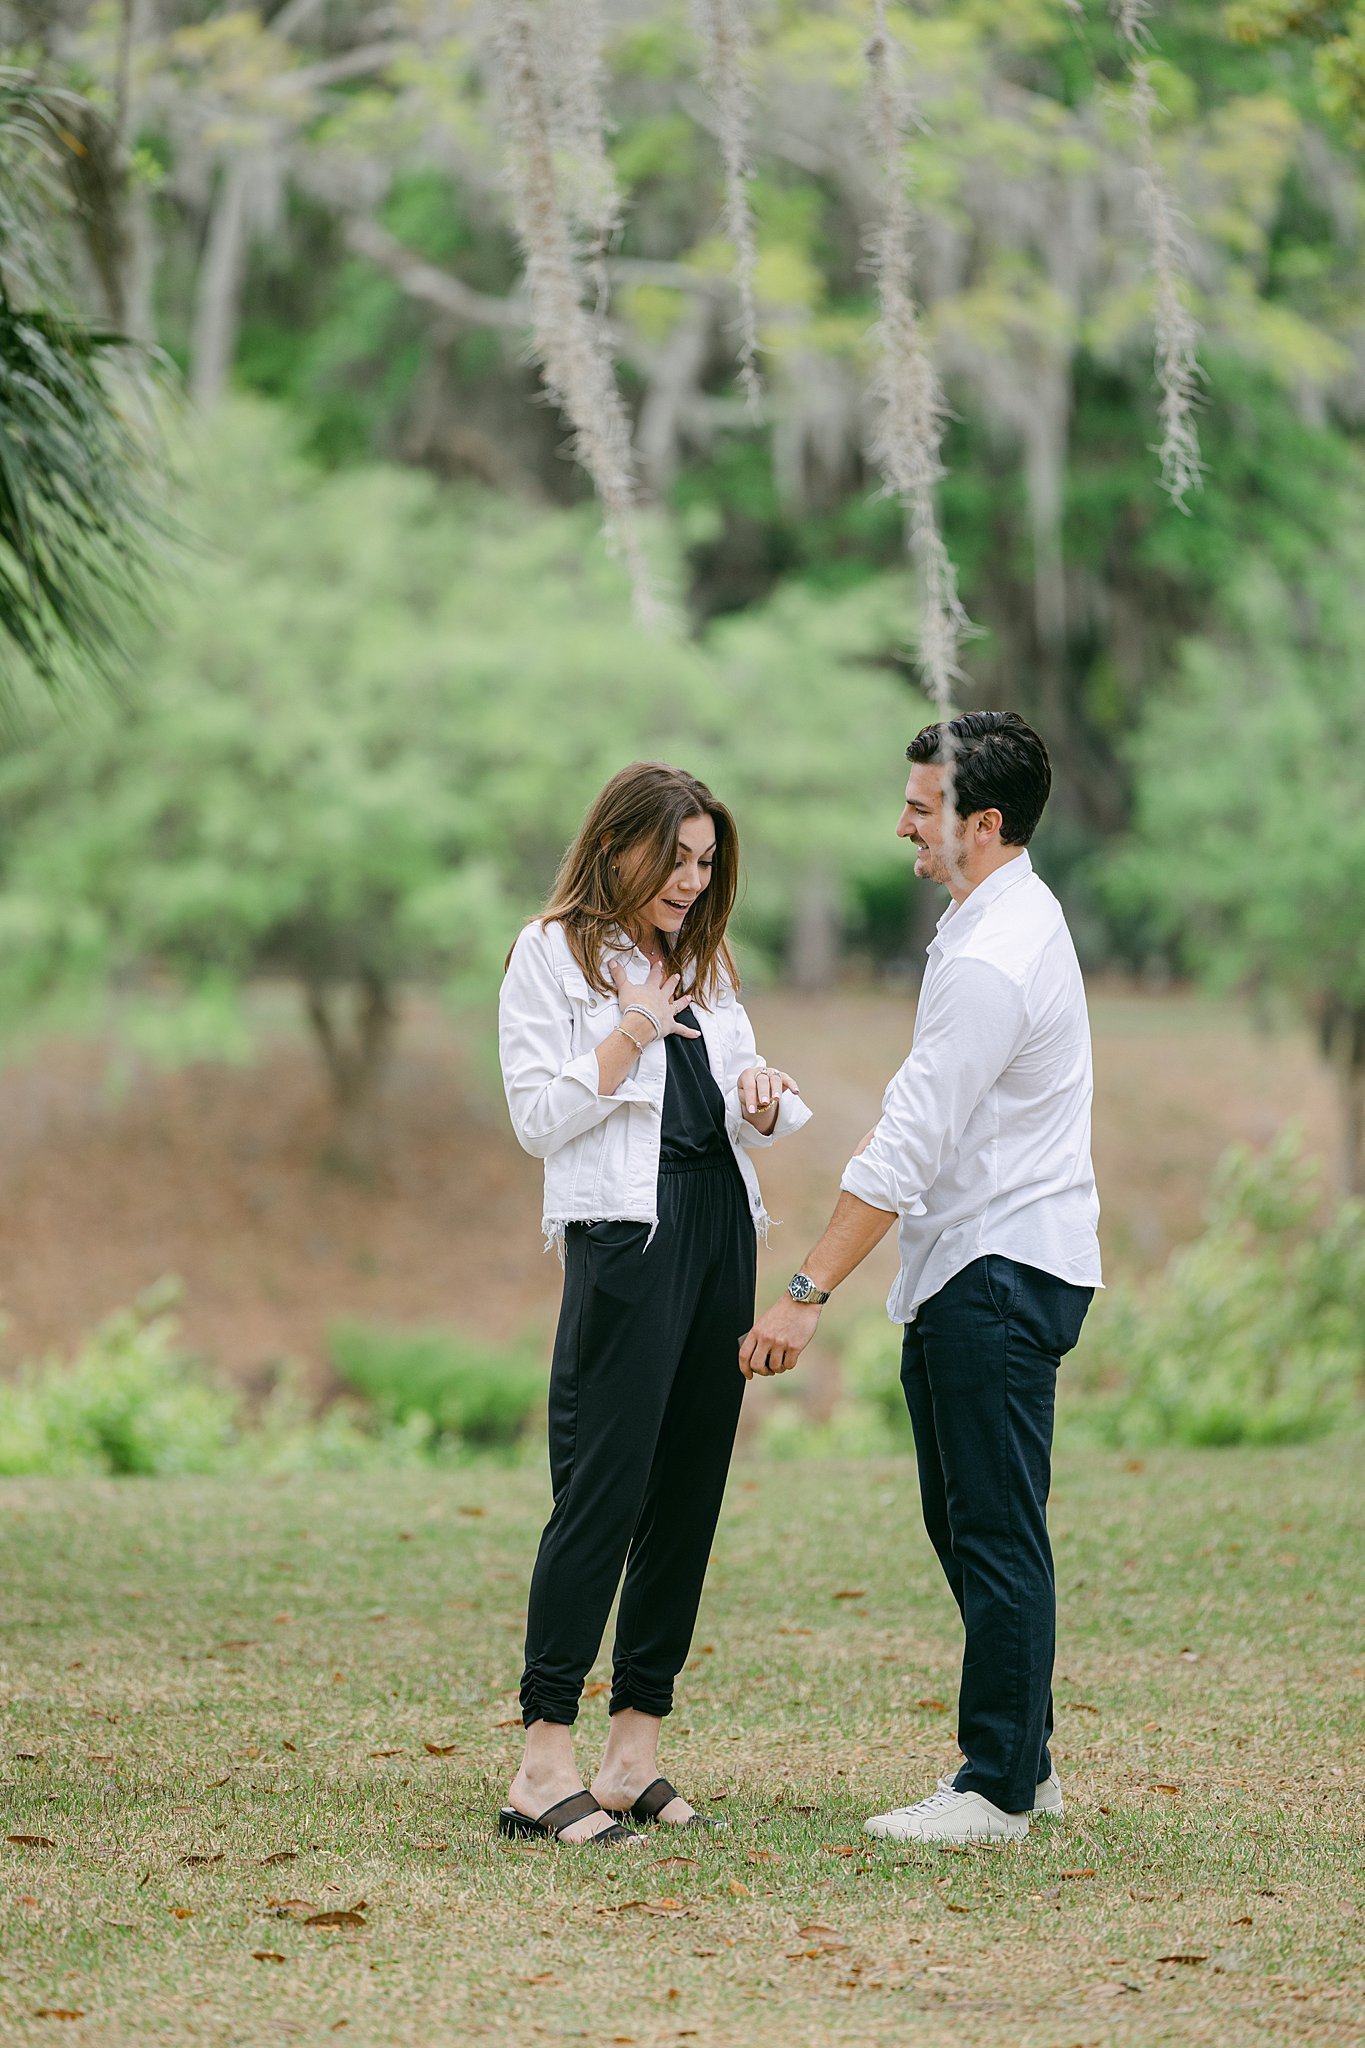 Katherine_Ives_Photography_Surprise_Proposal_Montage_Palmetto_Bluff__Session_72597.JPG